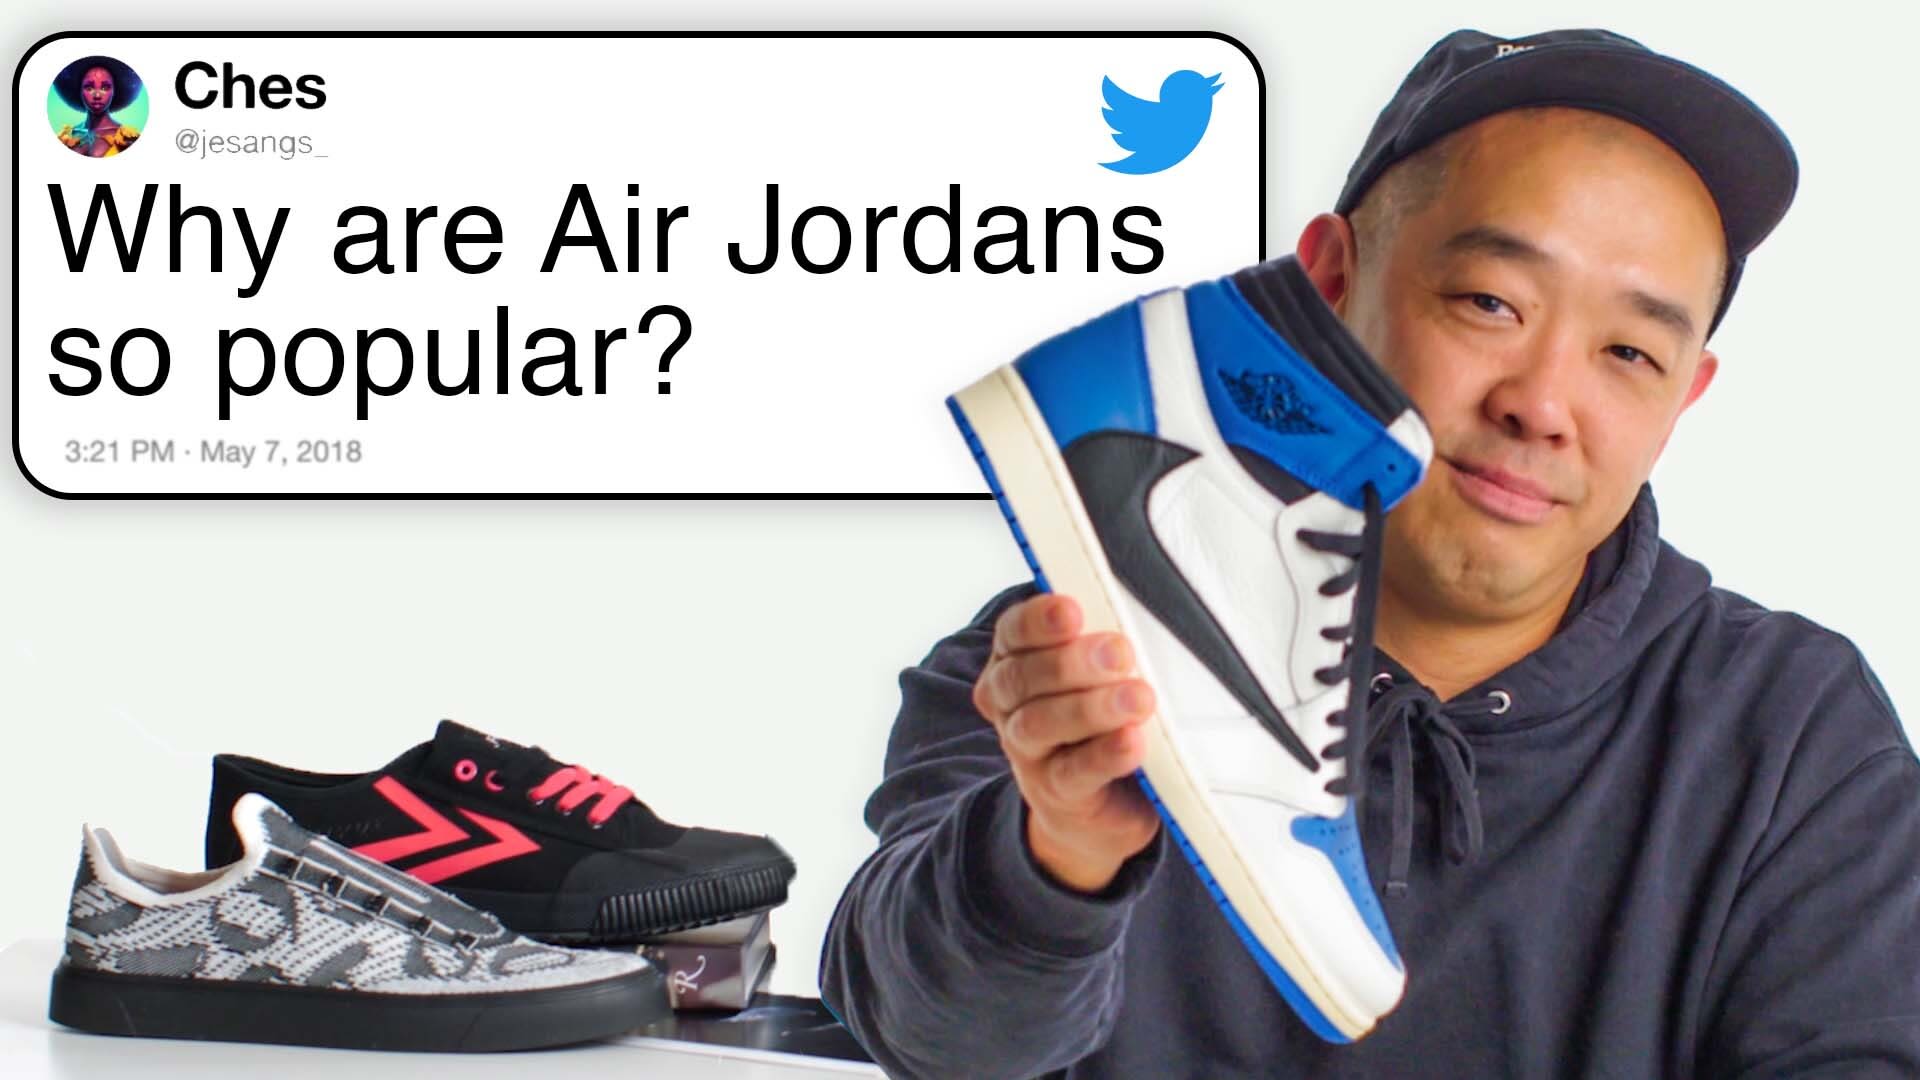 wired tech support sneaker expert answers sneaker questions from twitter